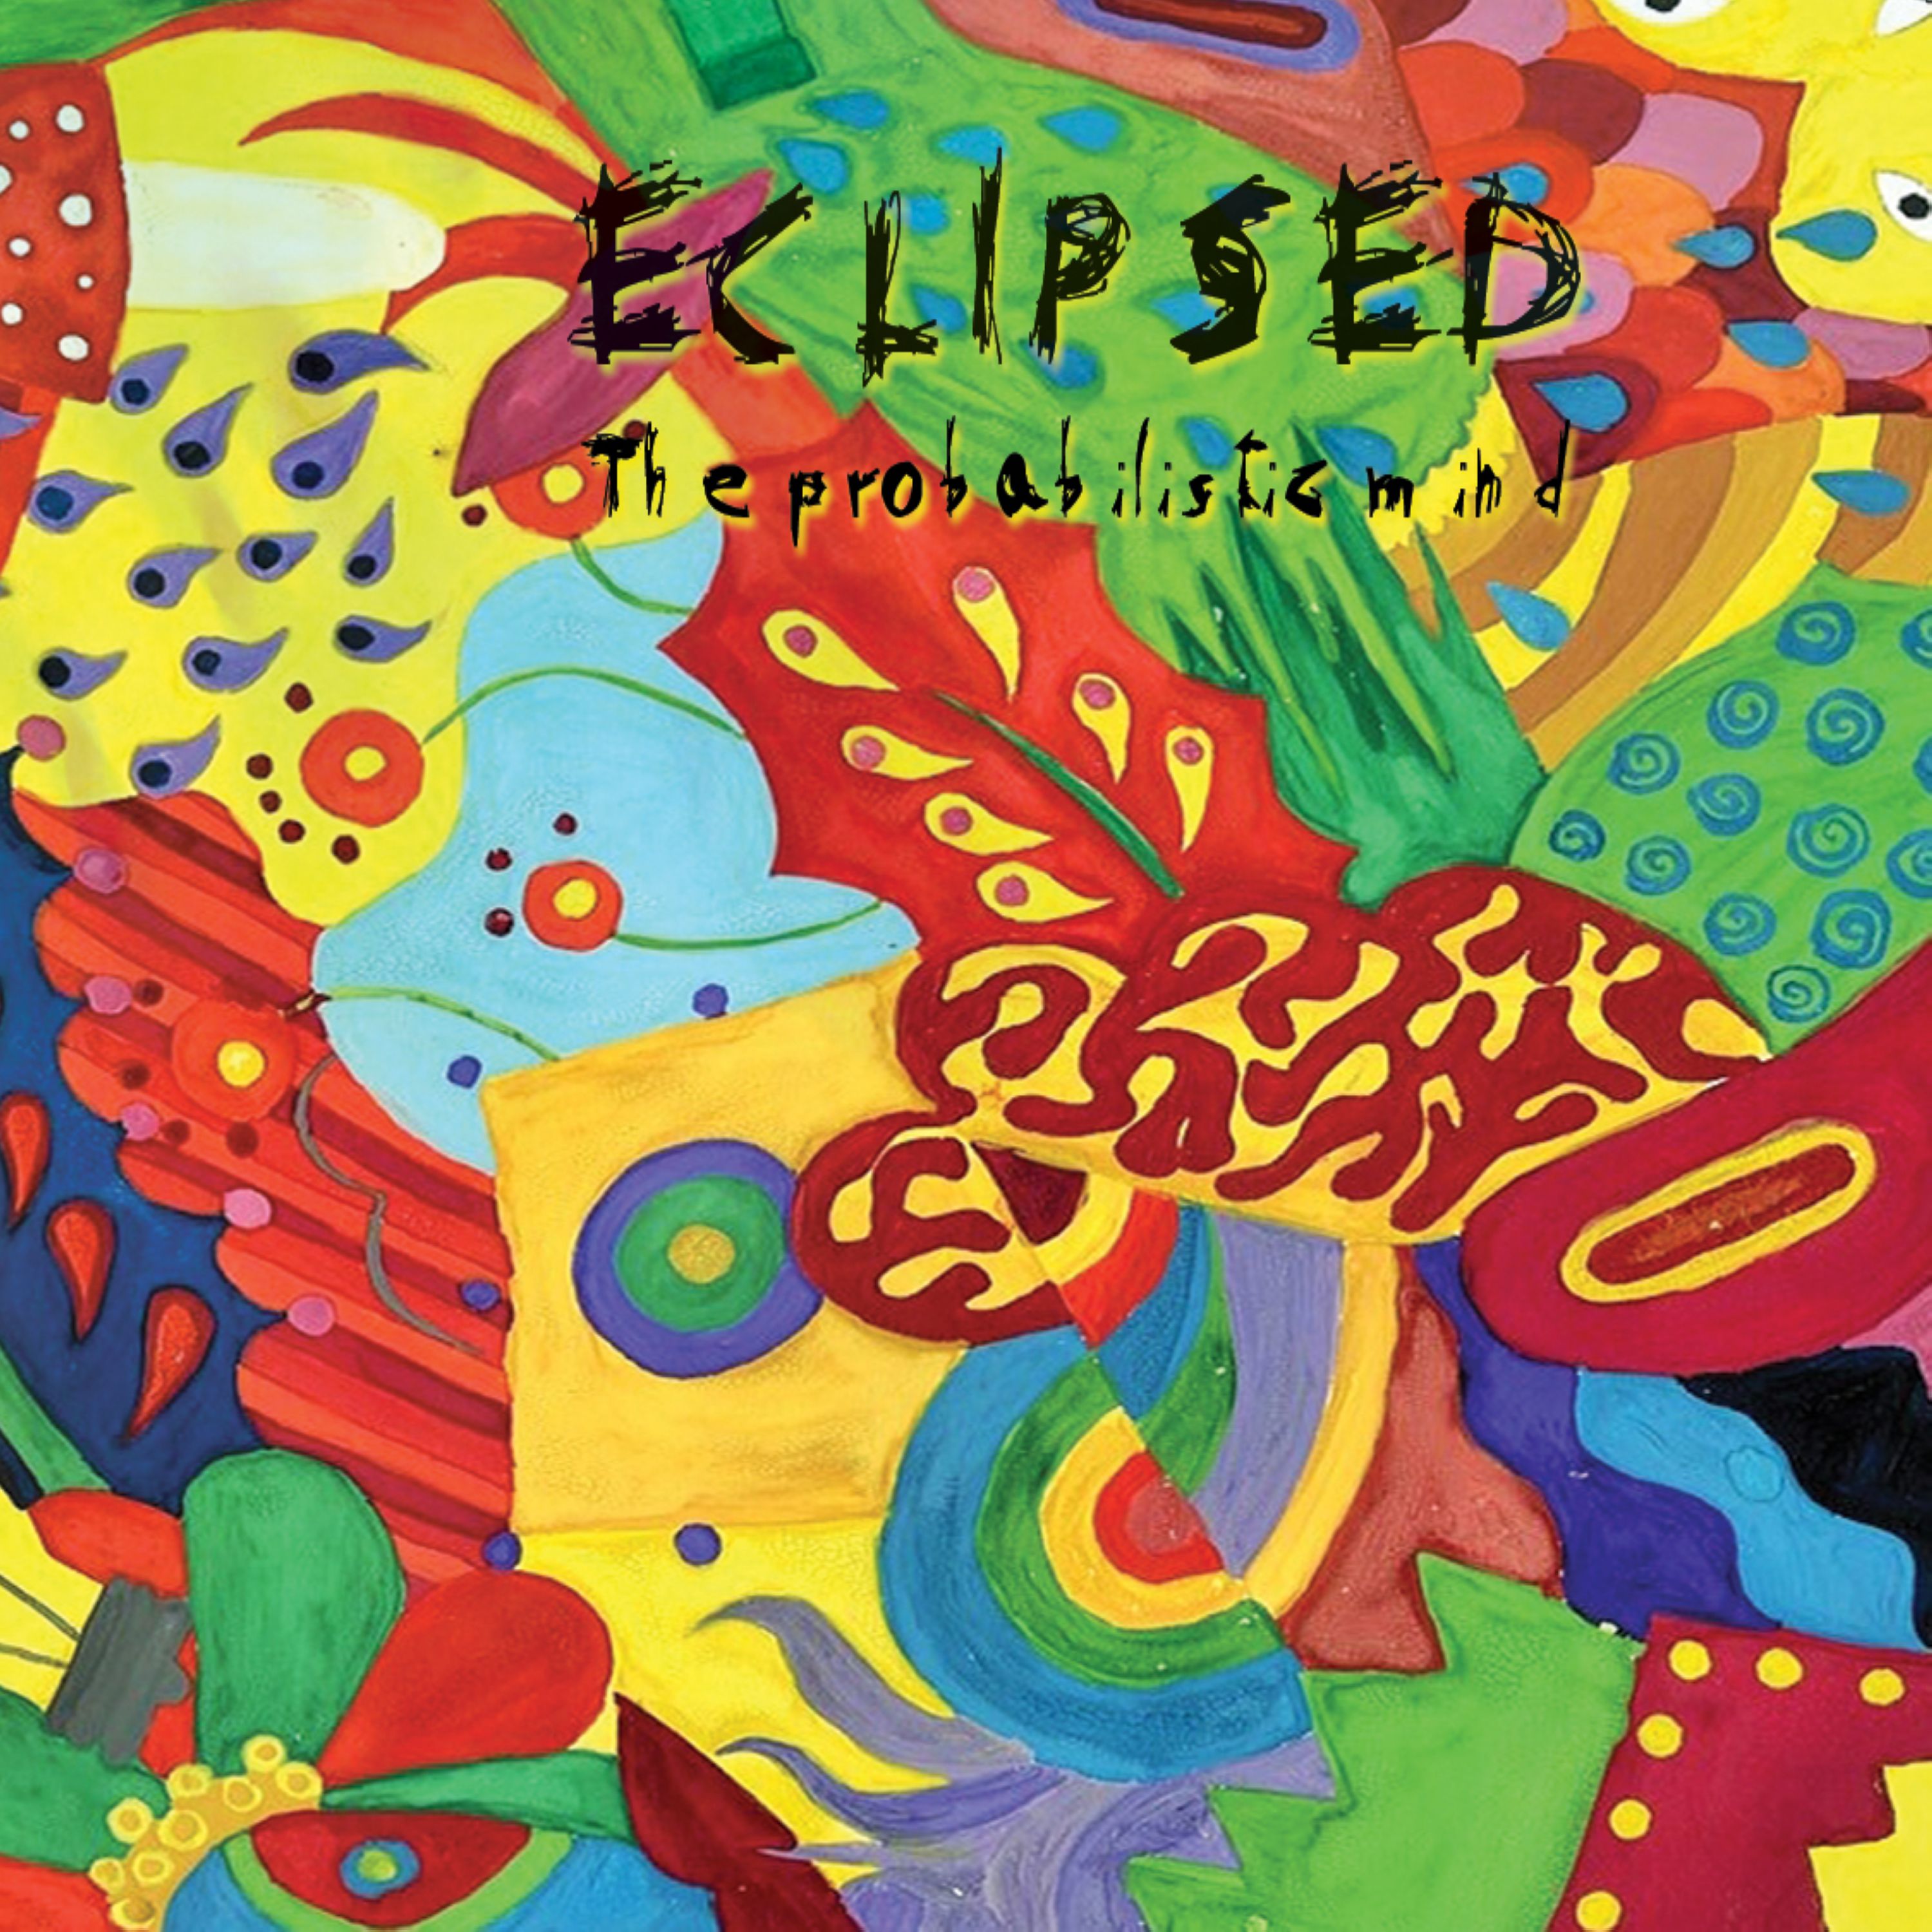 Eclipsed - The probabilistic mind / CDr